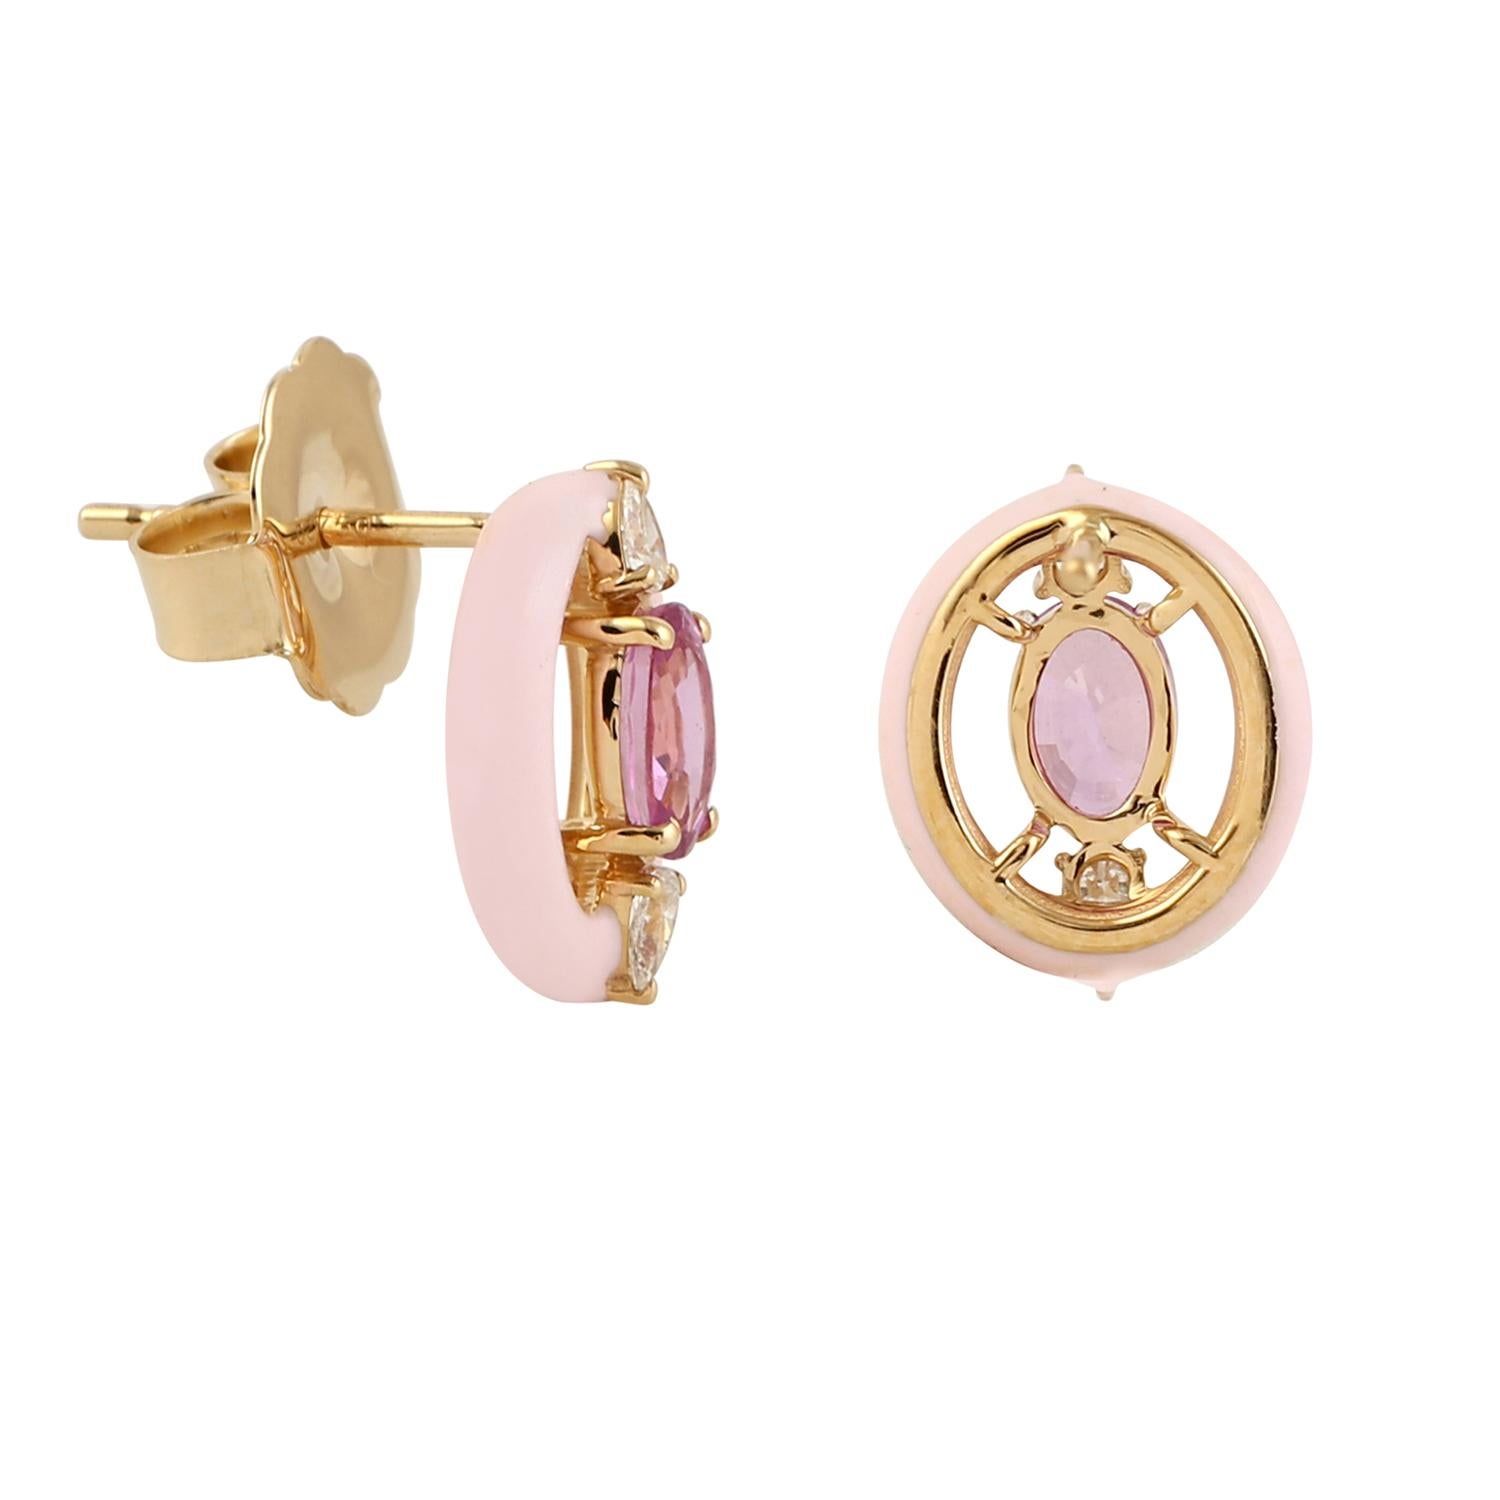 These enamel earrings are crafted from 18-karat gold & set with 1.47 carats pink sapphire and .20 carats of sparkling diamonds. Available in turquoise, red and white enamel. See matching ring part of this collection.

FOLLOW MEGHNA JEWELS storefront